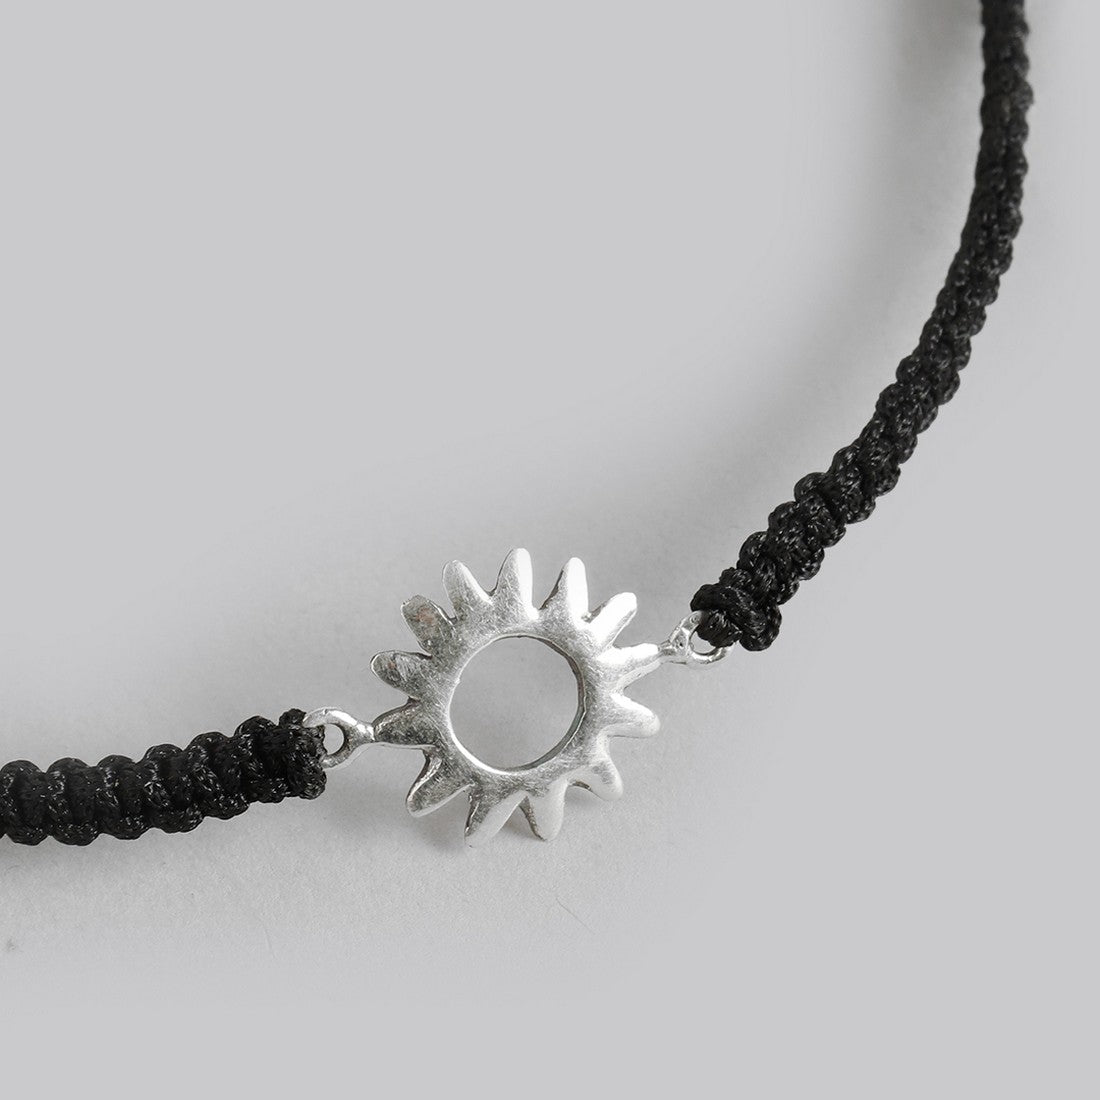 Classic 925 Sterling Silver Black Tread Anklet